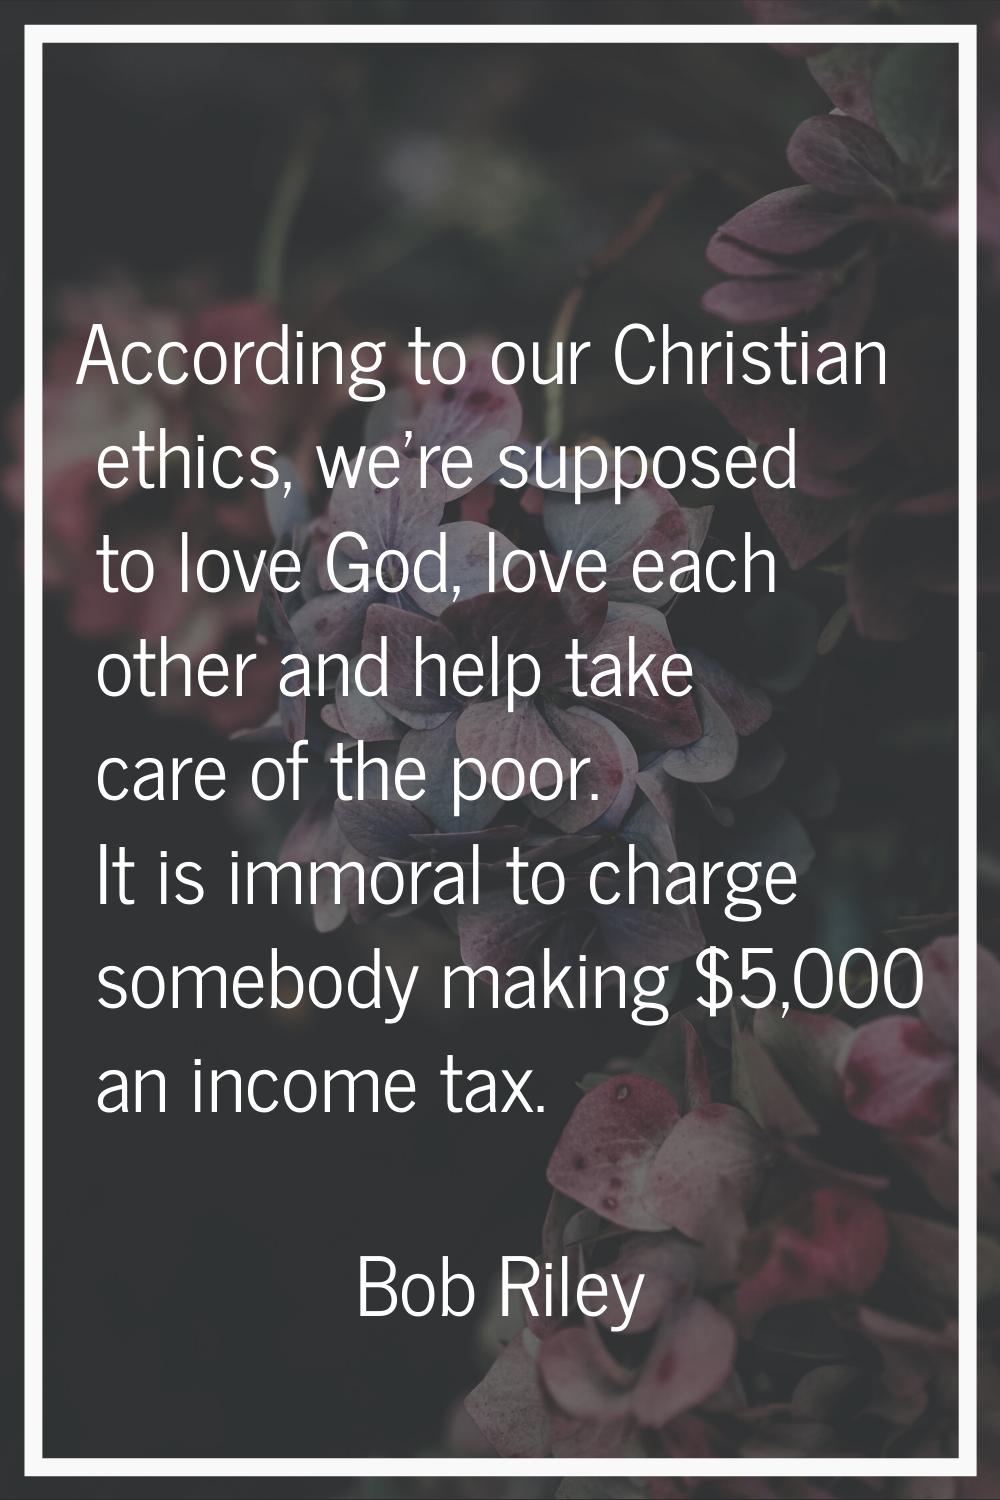 According to our Christian ethics, we're supposed to love God, love each other and help take care o